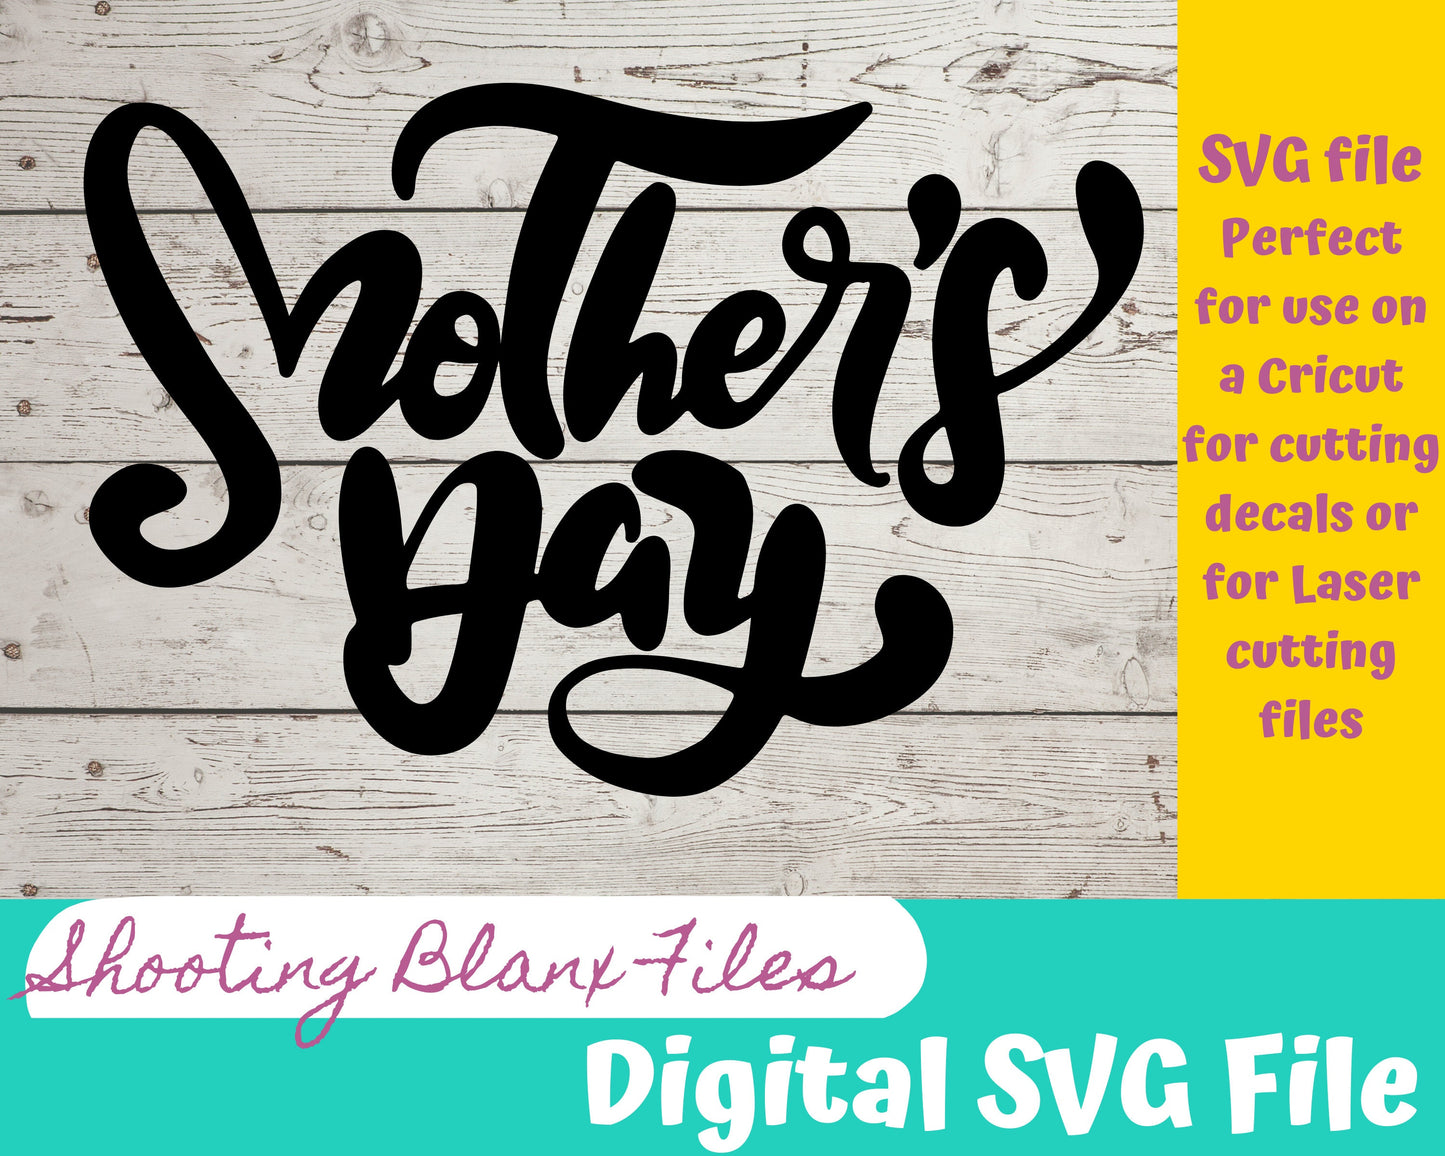 Mother's Day quote SVG file perfect for Cricut, Cameo, or Silhouette also great for laser engraving Glowforge , Mom, Mother